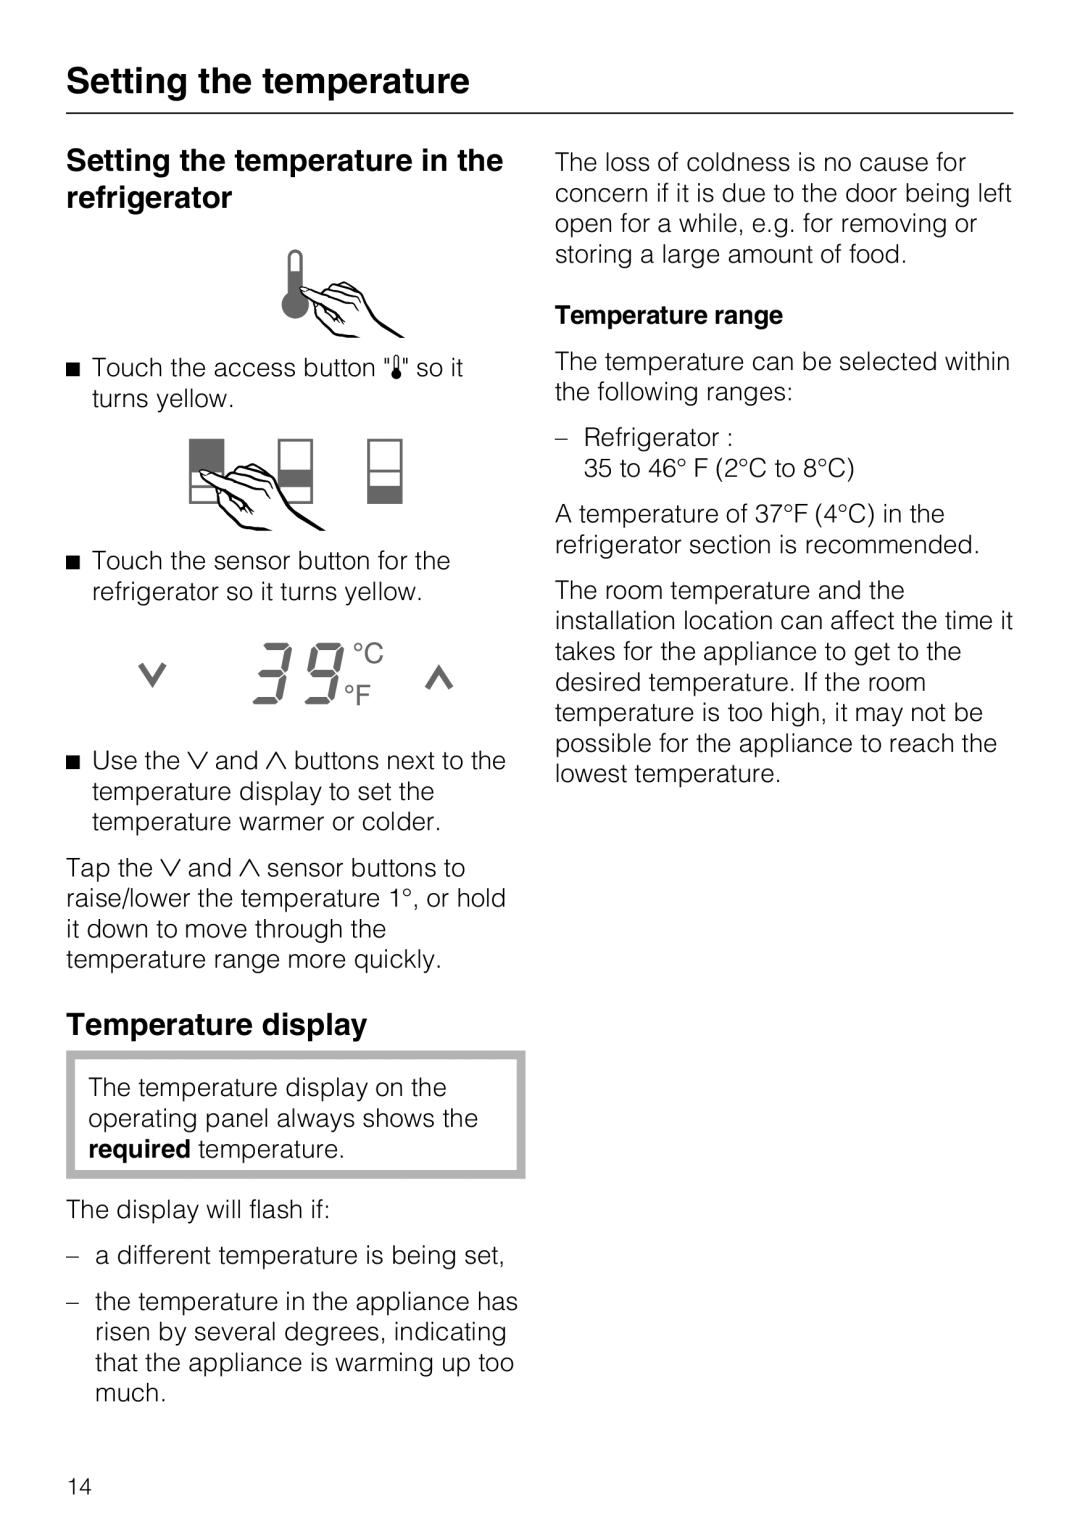 Miele 09 920 570 installation instructions Setting the temperature in the refrigerator, Temperature display 